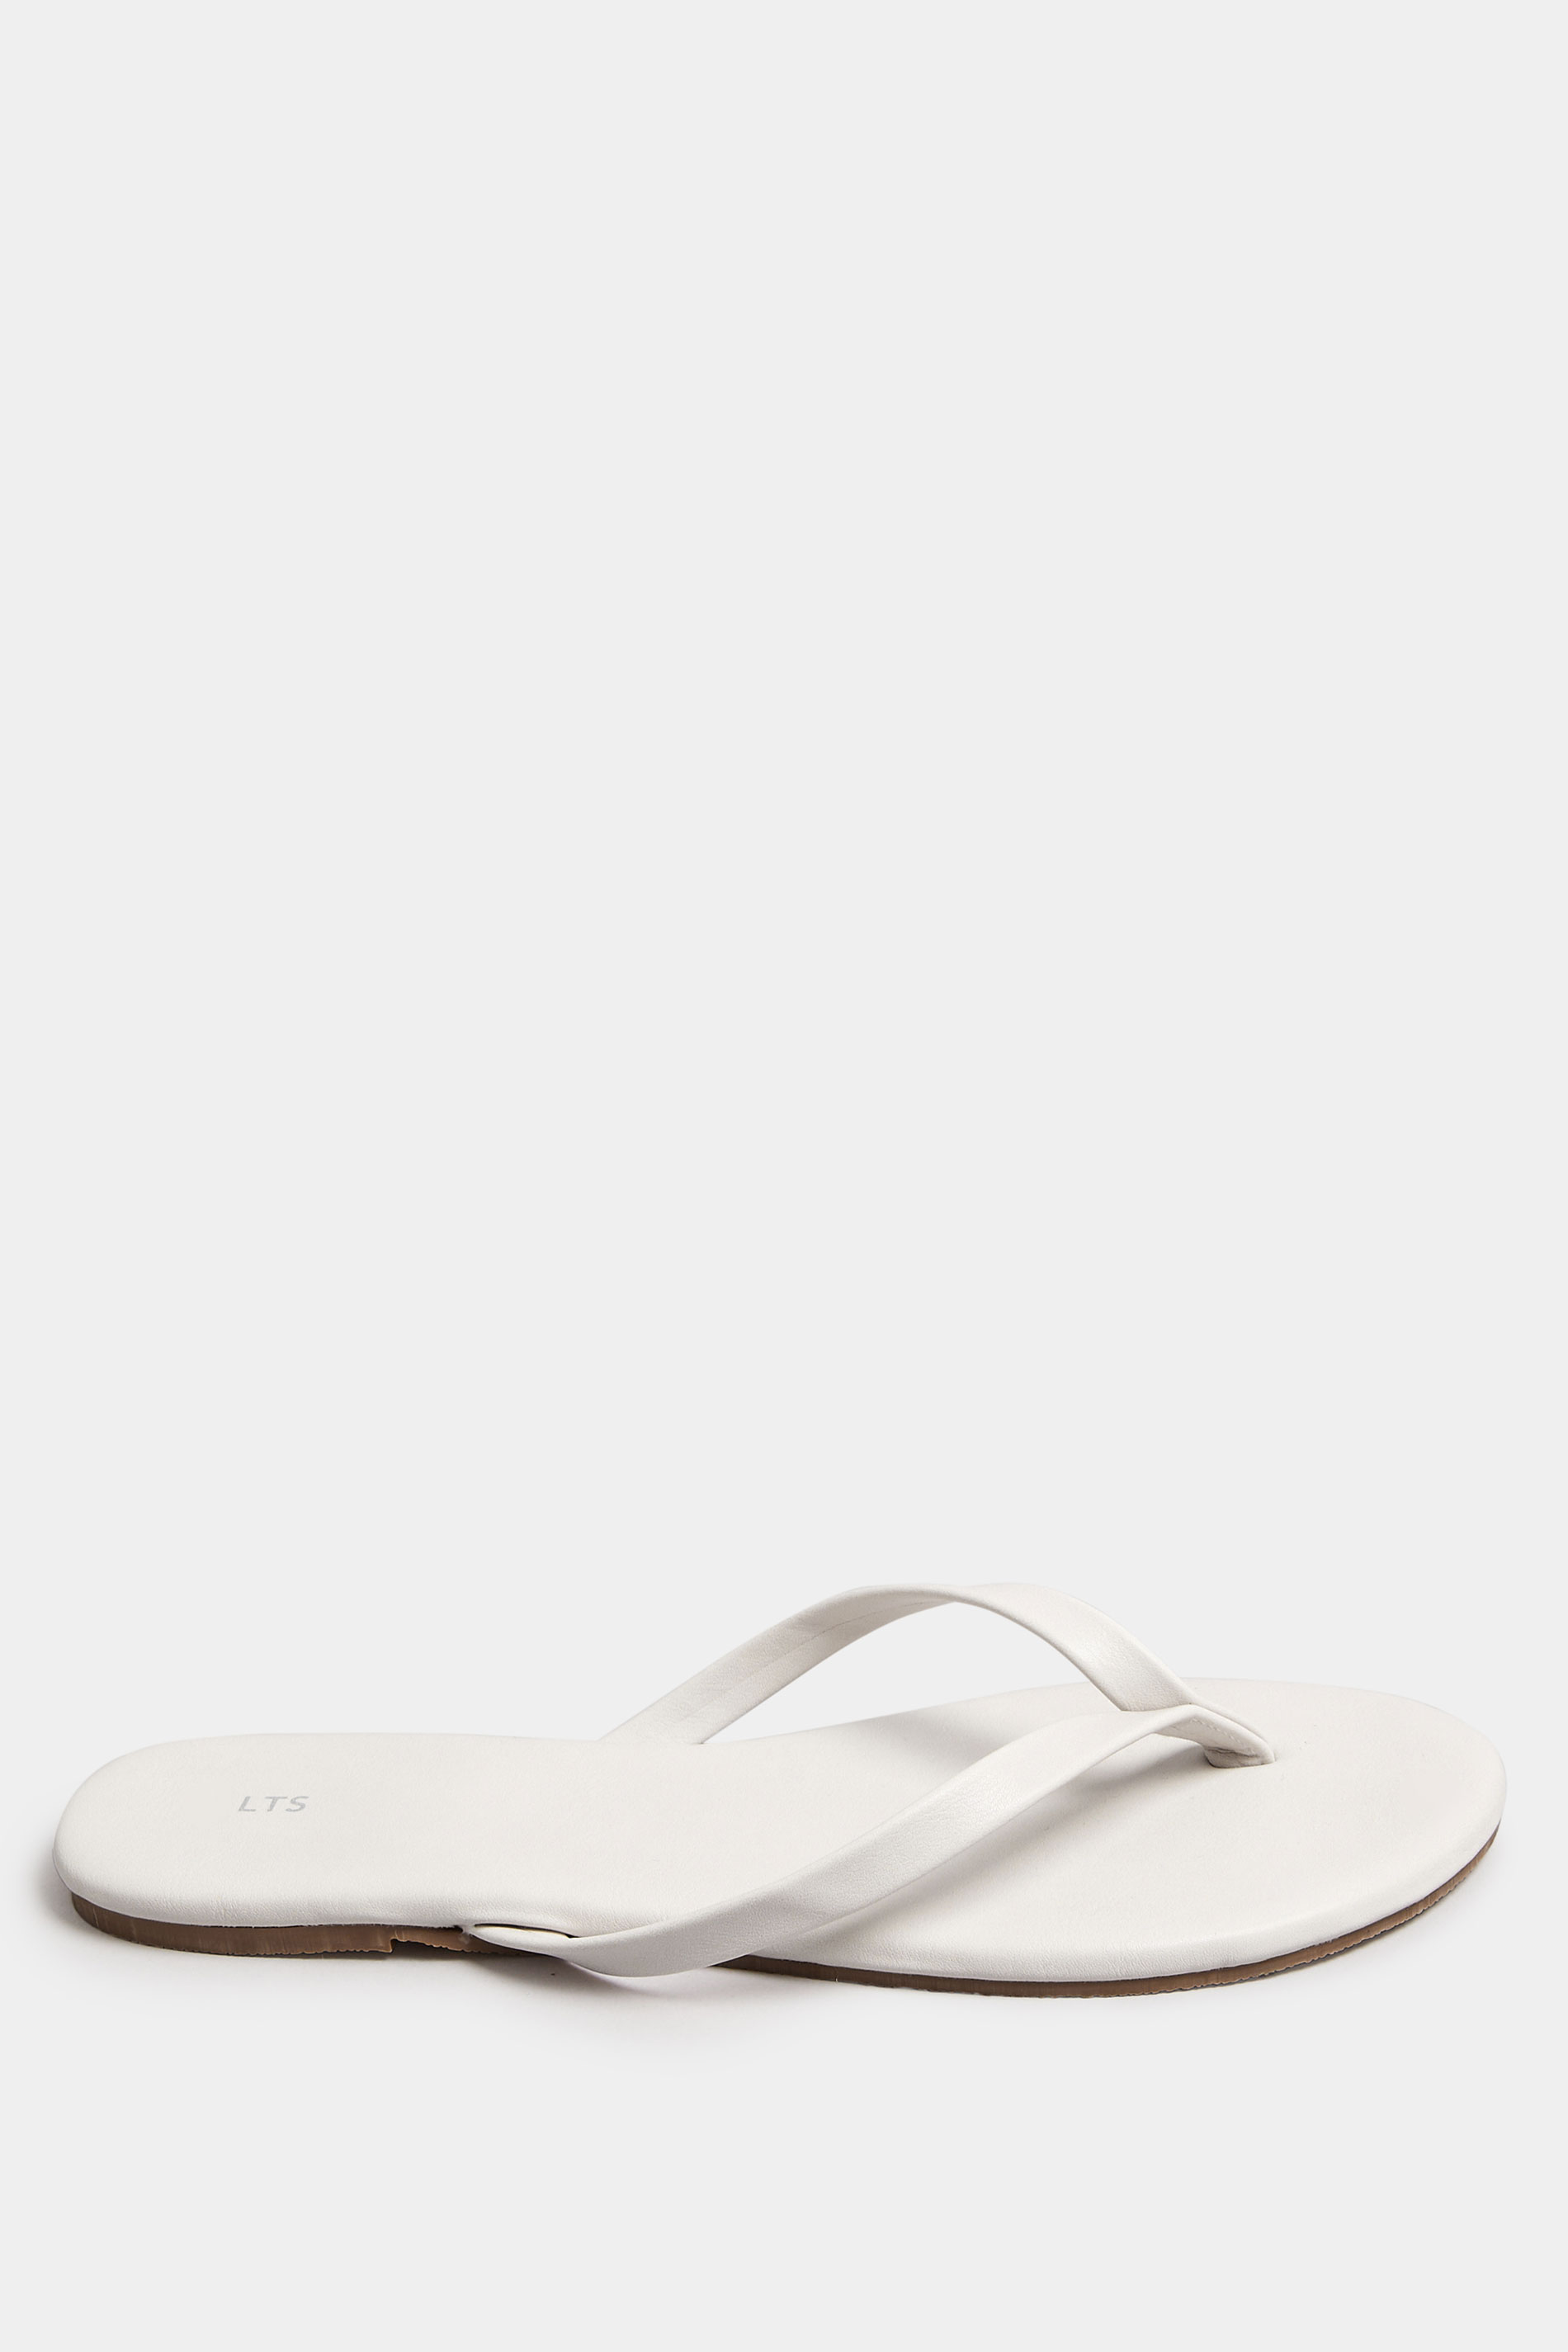 LTS White Flat Toe Thong Sandals In Standard Fit | Long Tall Sally 3